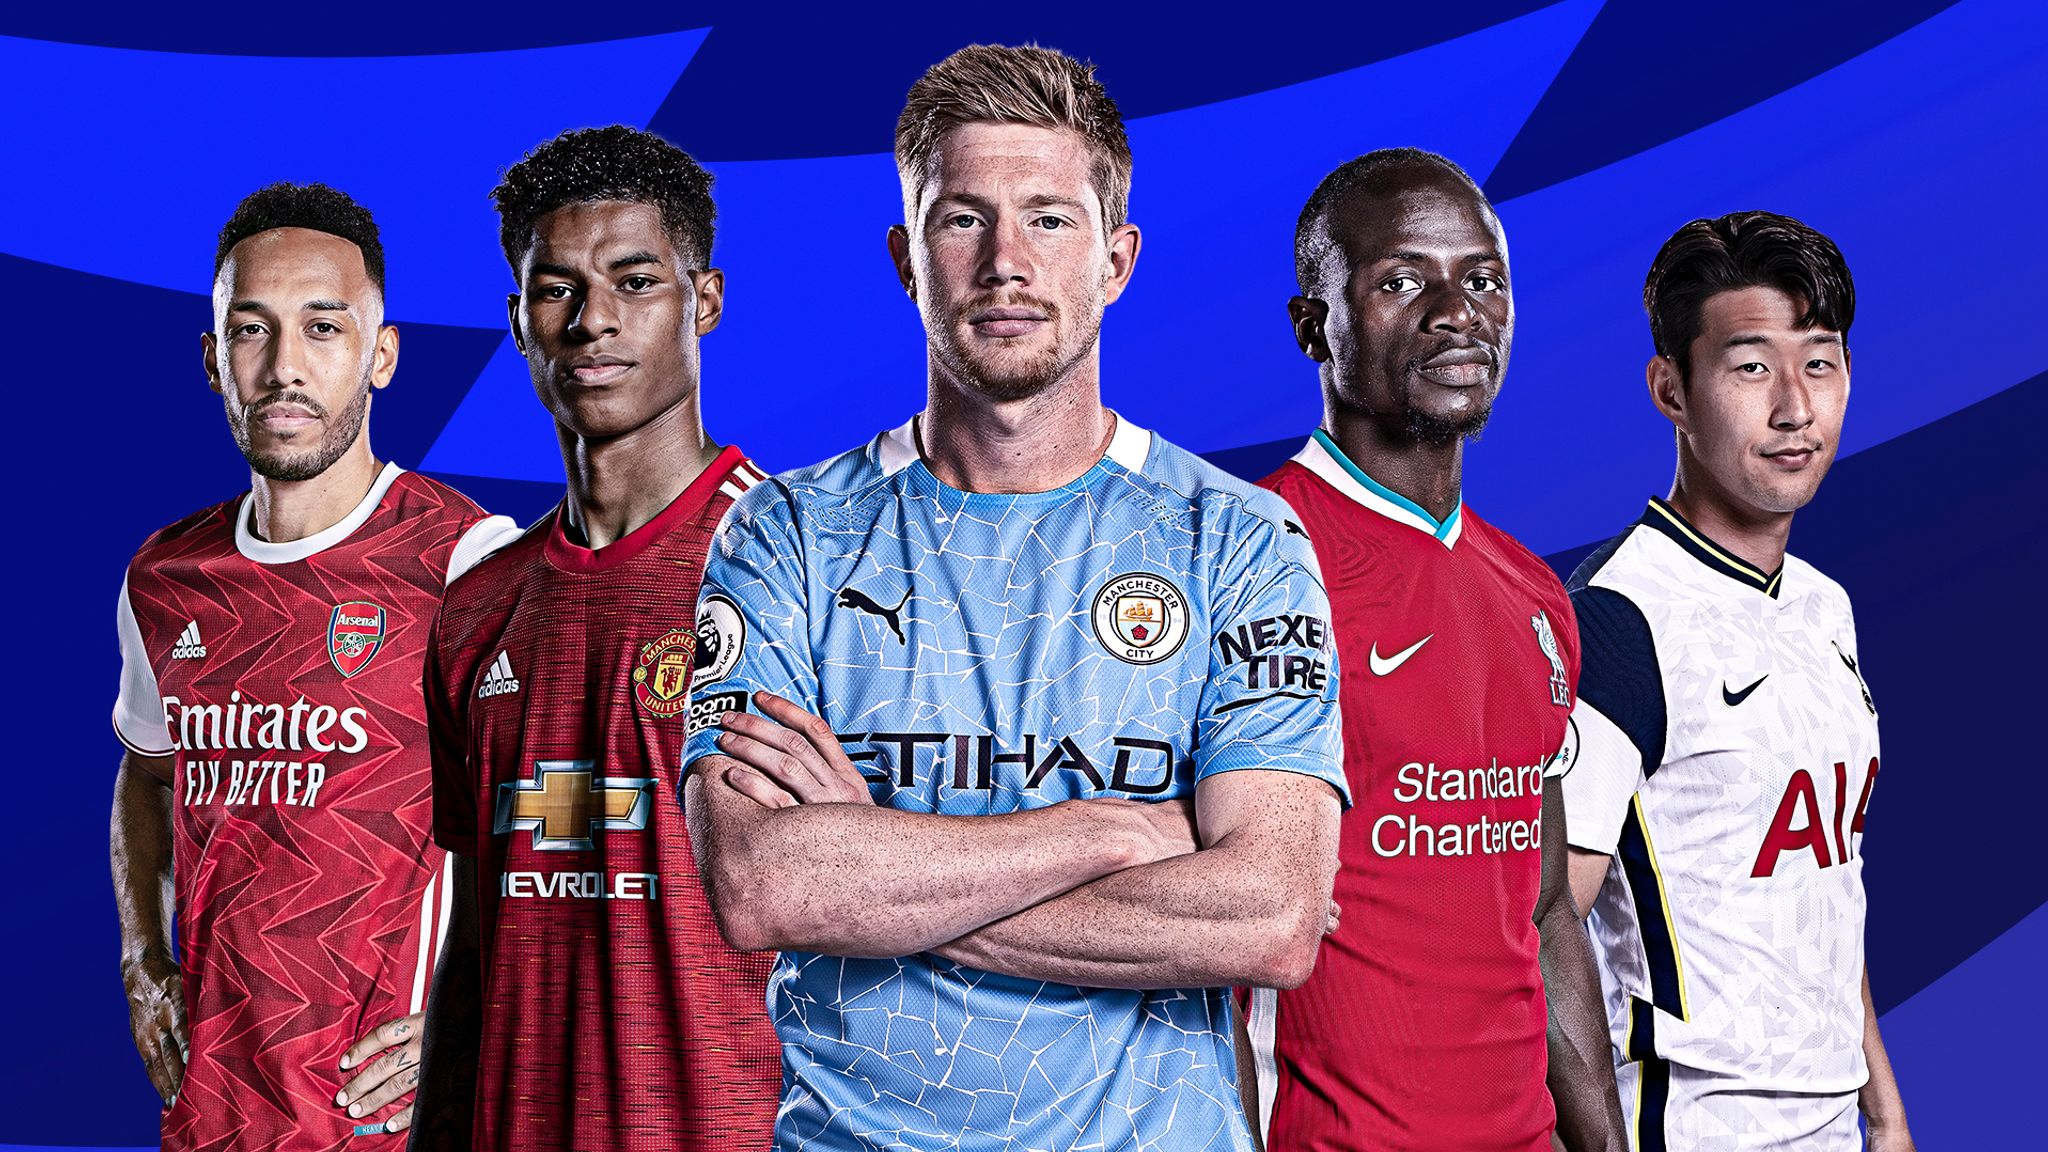 Premier League Sky Sports to show Manchester derby and north London